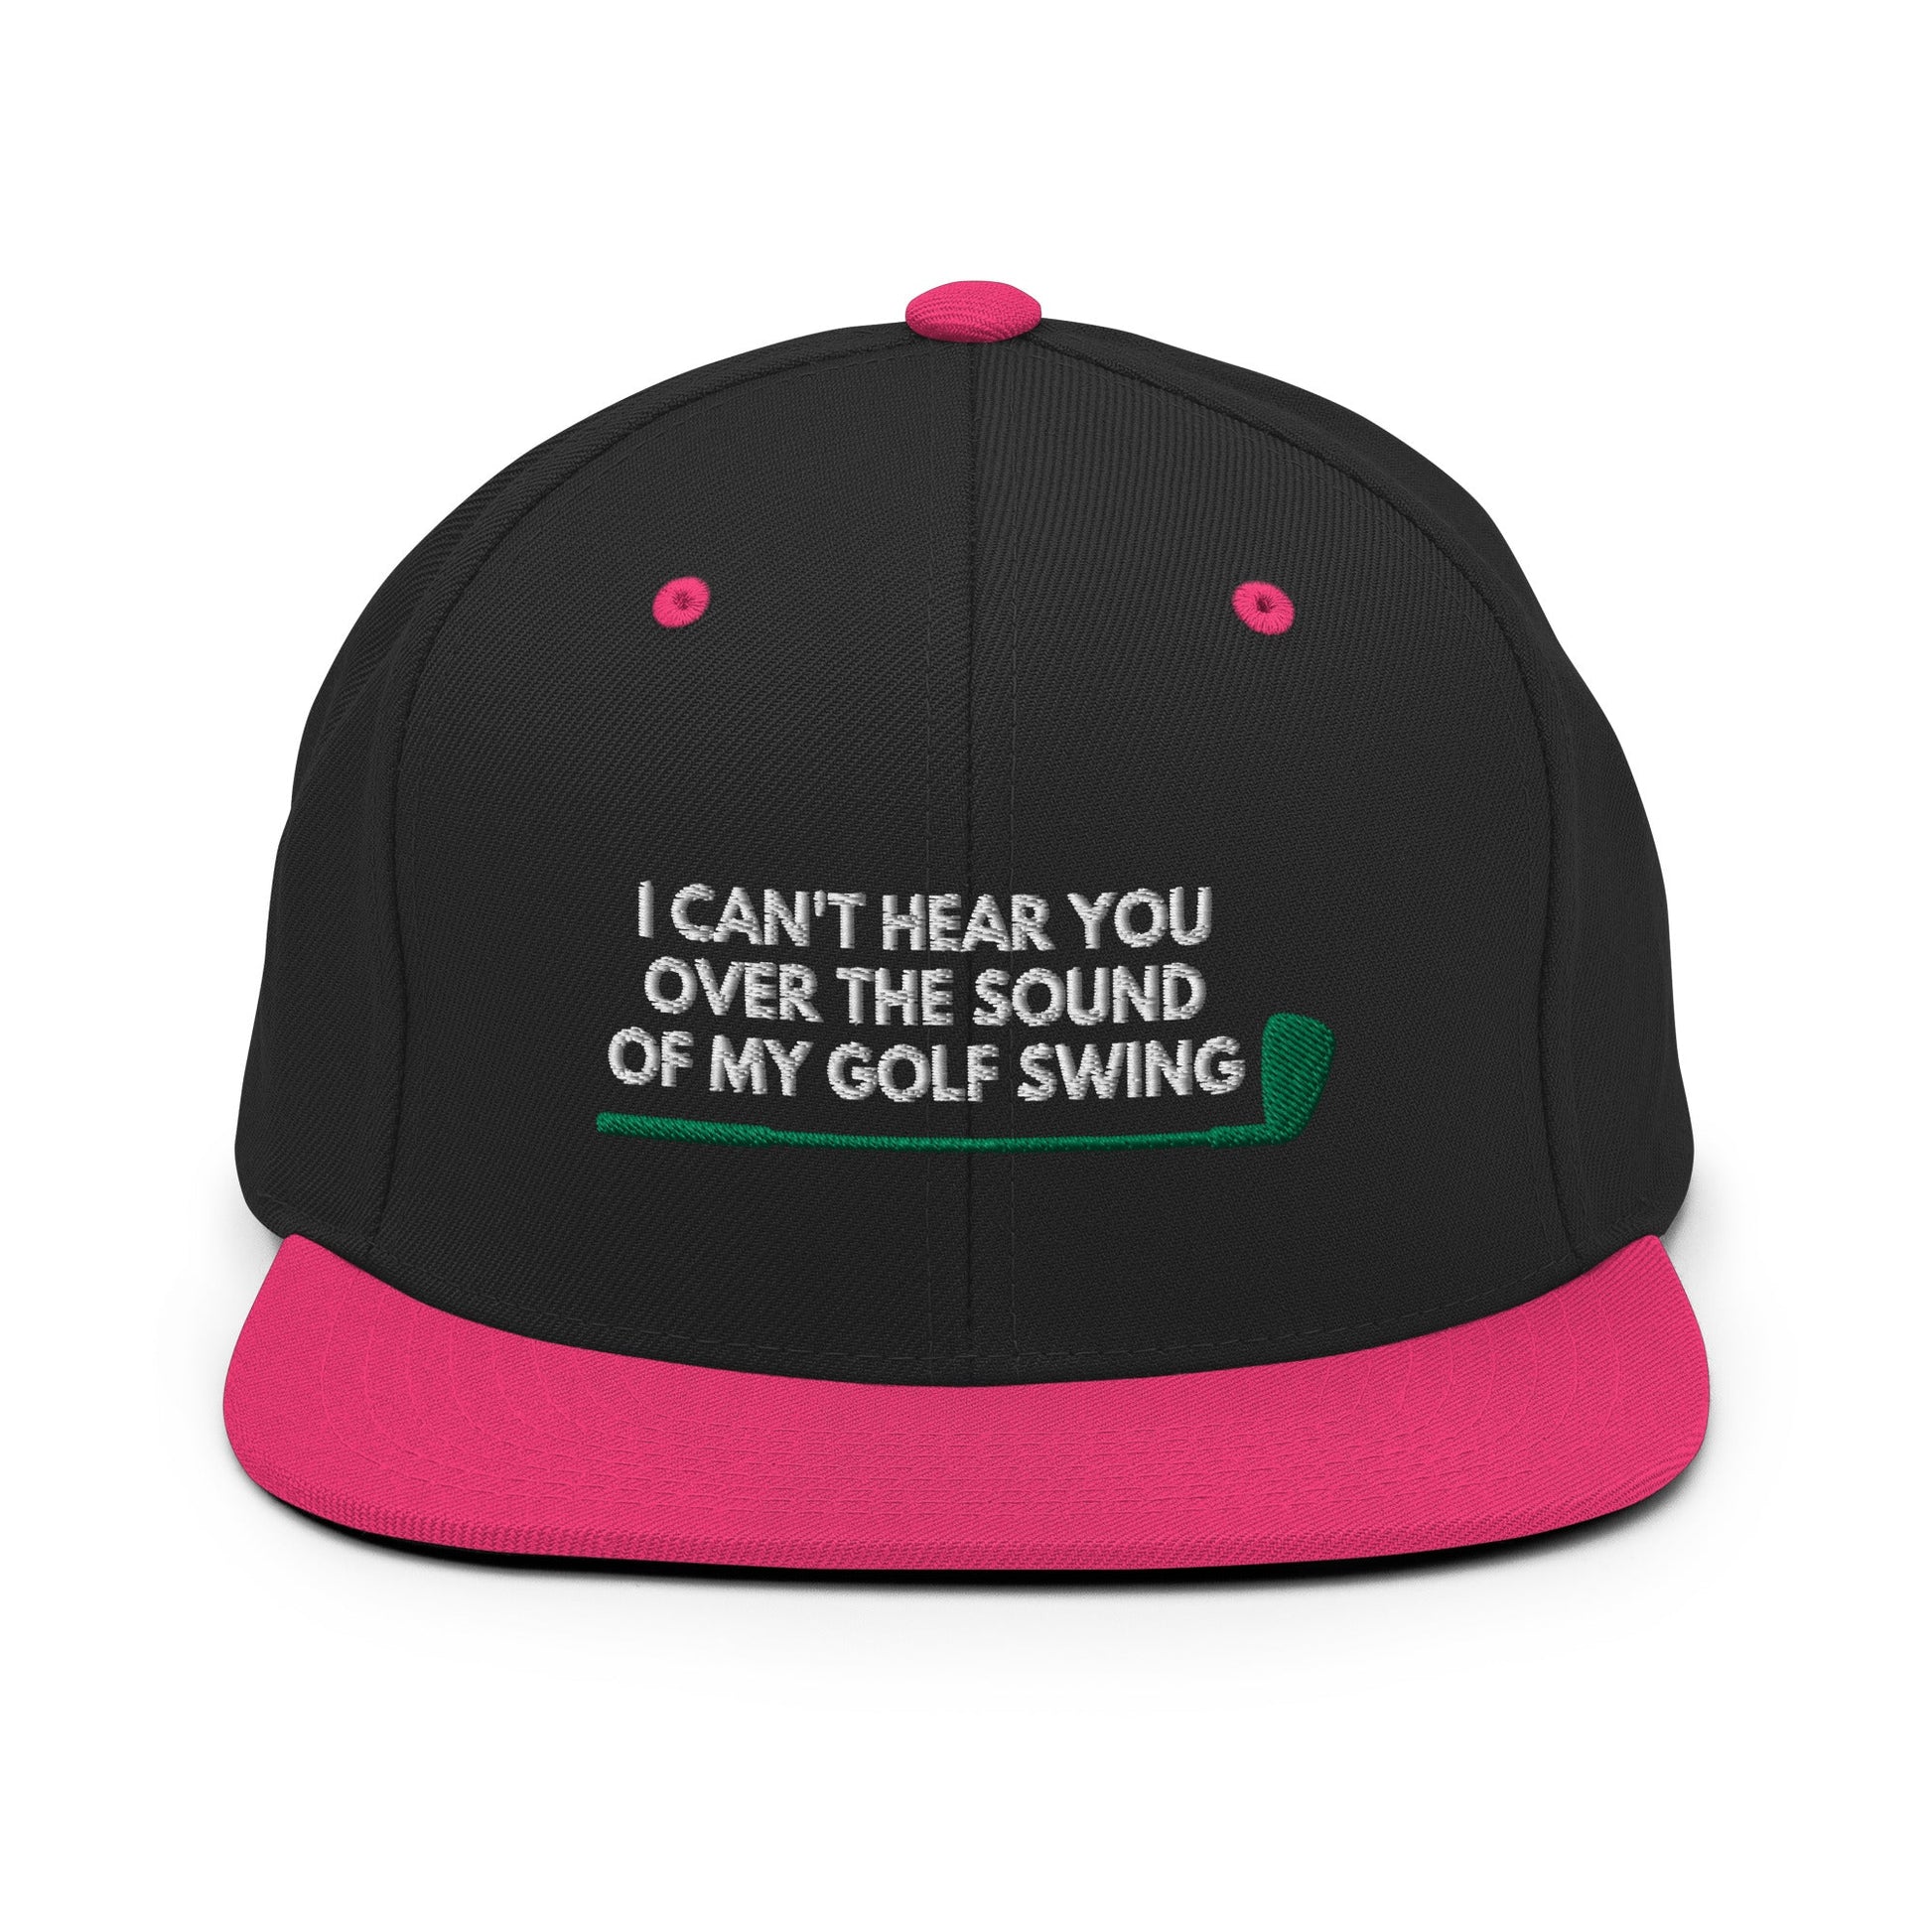 Funny Golfer Gifts  Snapback Hat Black/ Neon Pink I Cant Hear You Over The Sound Of My Golf Swing Hat Snapback Hat